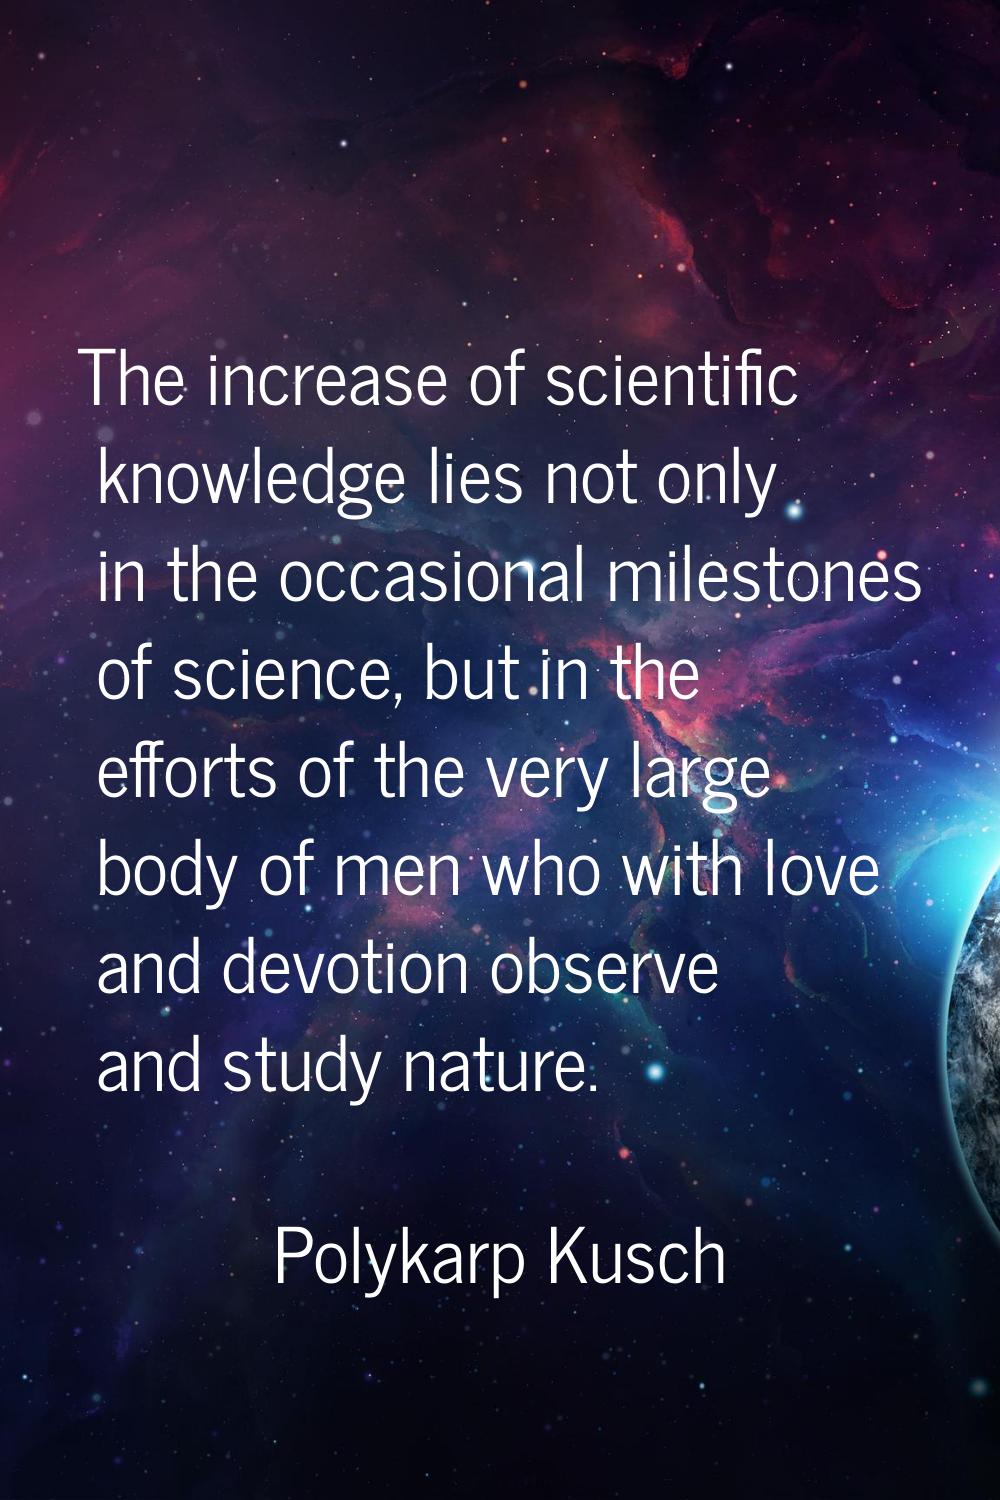 The increase of scientific knowledge lies not only in the occasional milestones of science, but in 